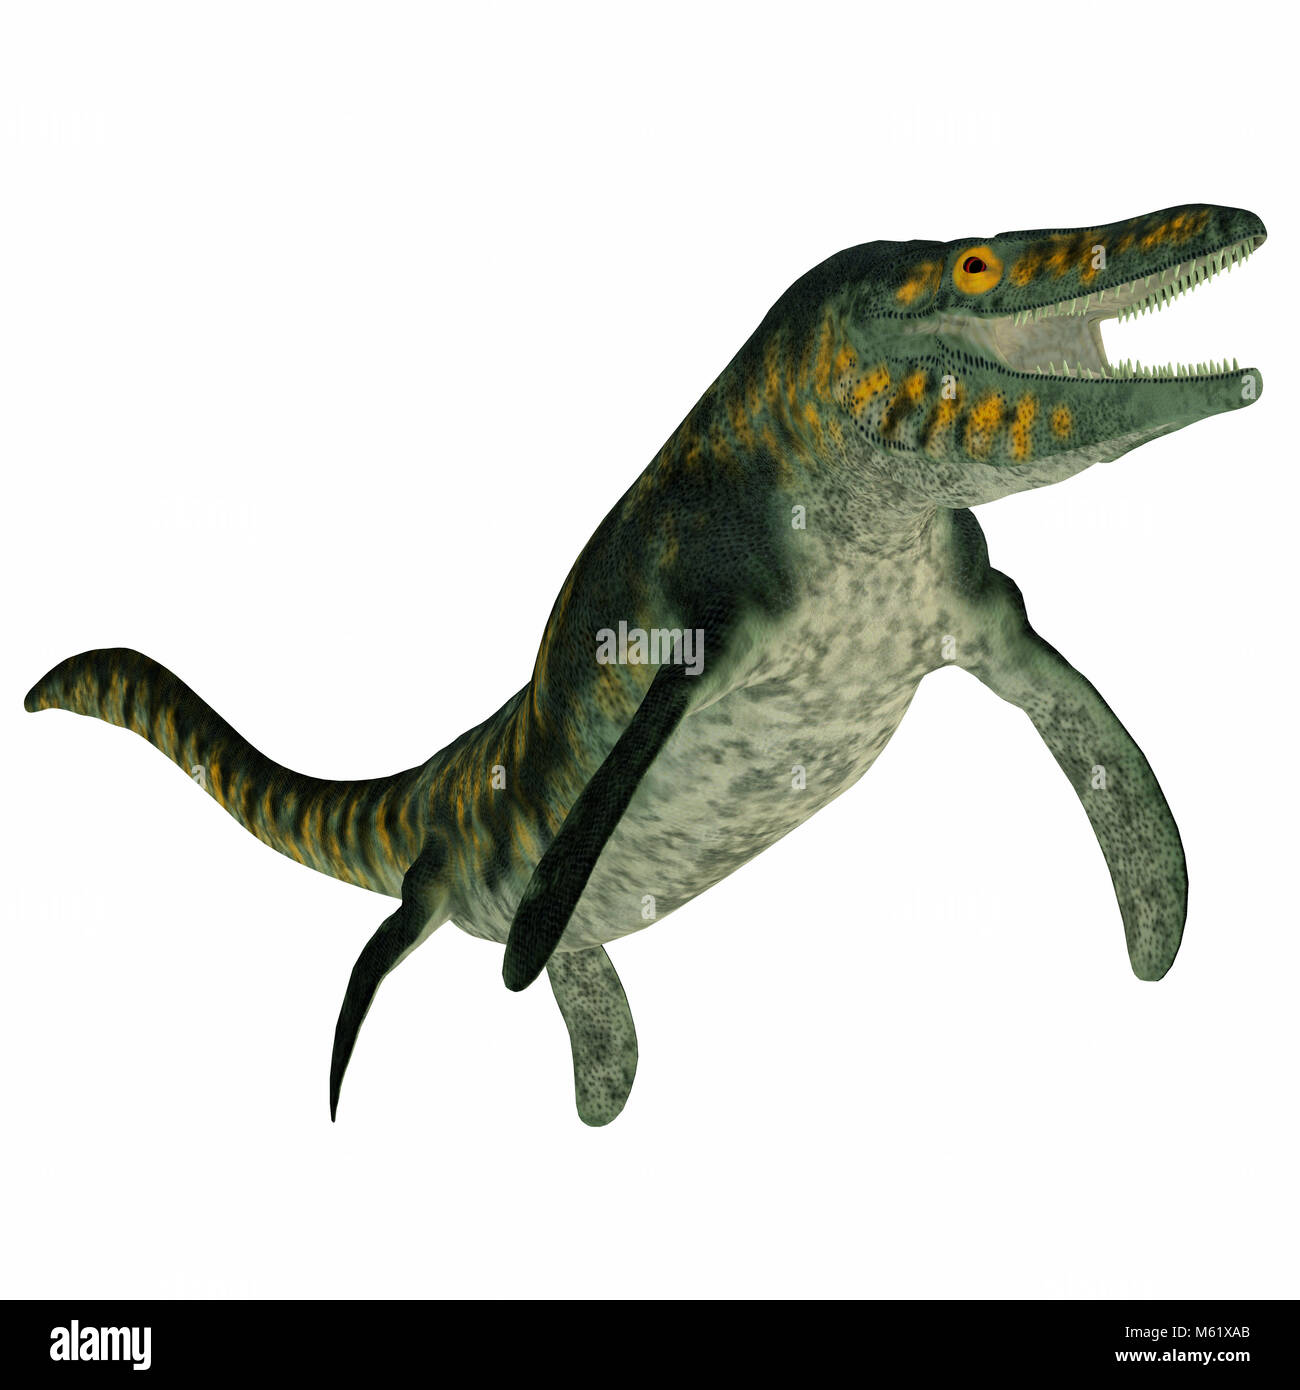 Tylosaurus was a carnivorous marine reptile that lived in the North America Western Interior Seaway during the Cretaceous Period. Stock Photo